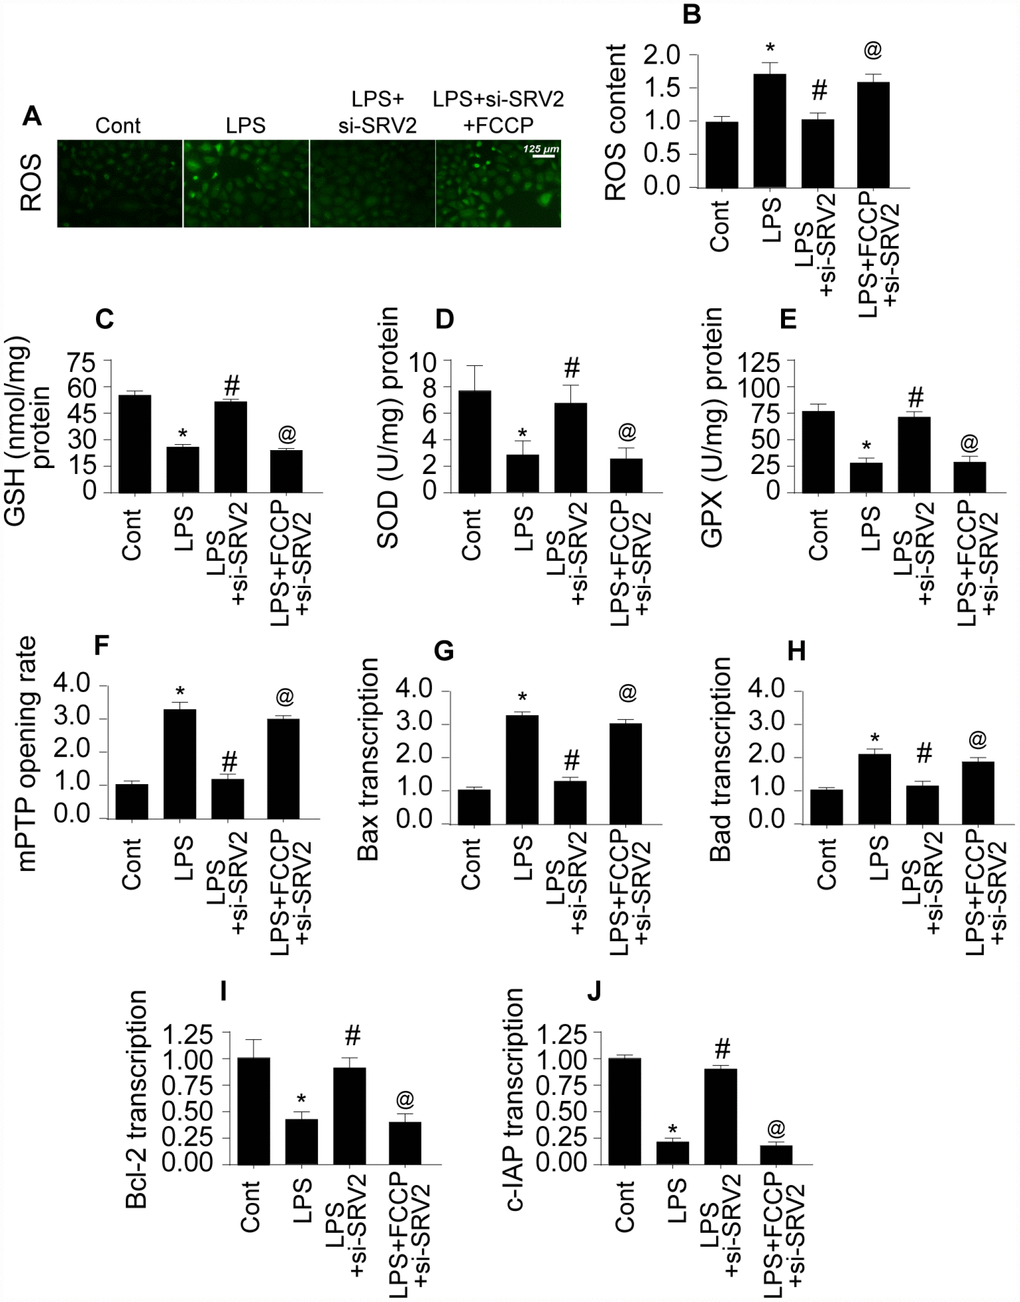 SRV2-induced mitochondrial fission promotes mitochondrial damage. (A–B) An ROS probe was used to detect ROS production in cardiomyocytes after transfection of siRNA against SRV2 and addition of FCCP to the culture medium. (C–E) SOD, GSH, and GPX levels were measured via ELISA in cardiomyocytes after SRV2 siRNA transfection and FCCP treatment. (F) mPTP opening was determined via ELISA in cardiomyocytes after SRV2 siRNA transfection and FCCP treatment. (G–J) After treatment, RNA was isolated from LPS-treated cardiomyocytes and qPCR was performed to analyze Bcl2, Bad, Bax, and c-IAP transcript levels after SRV2 siRNA transfection and FCCP treatment. *p